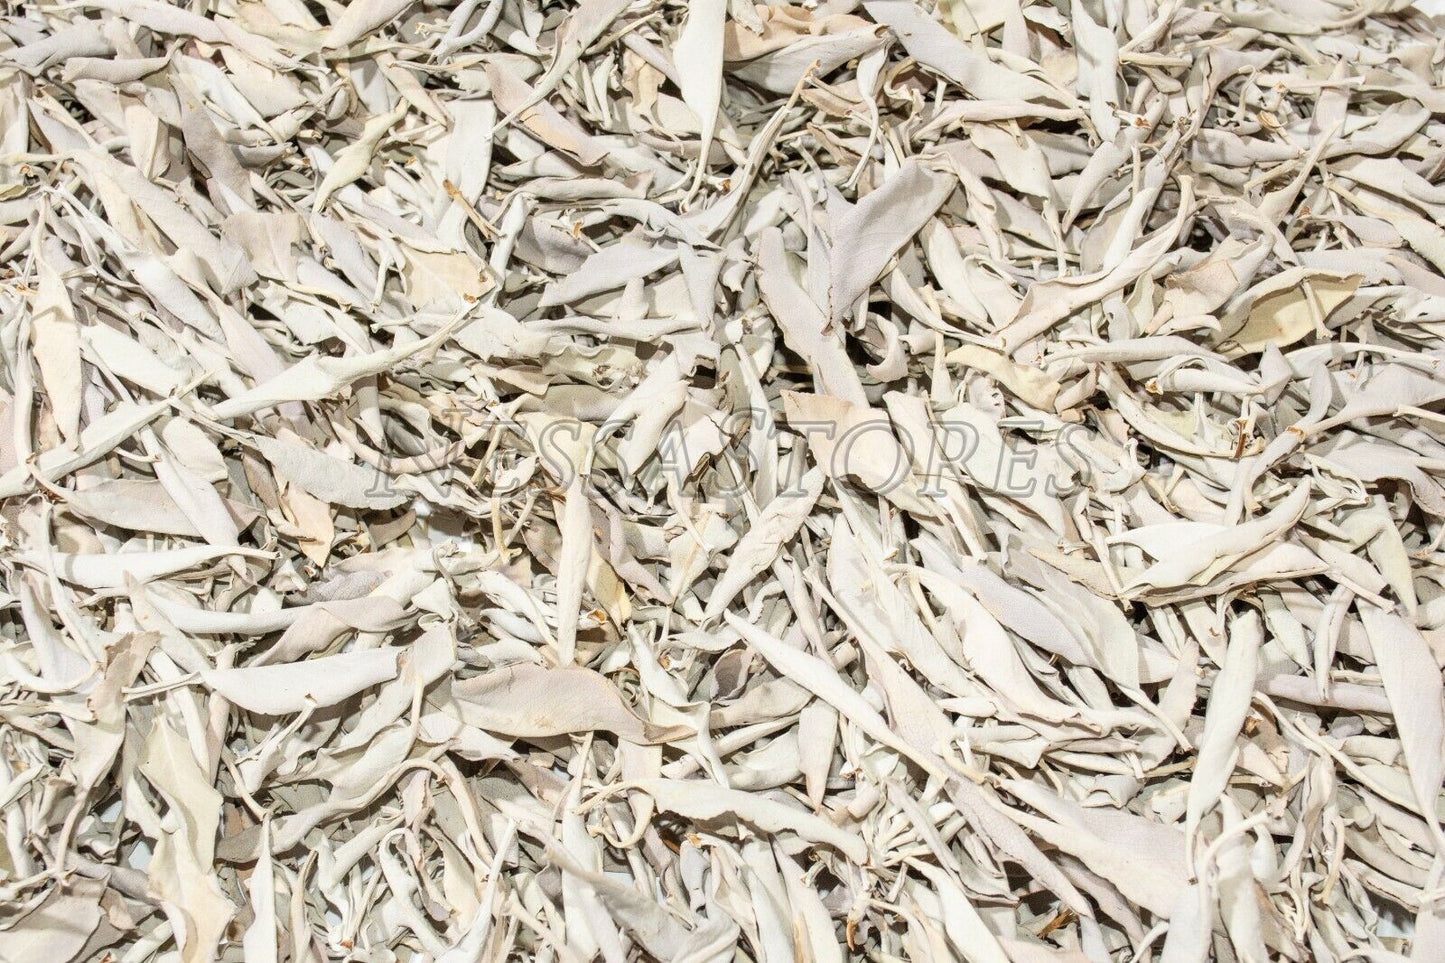 NessaStores California White Sage LEAVES ONLY Incense (1 lb) #JC-003